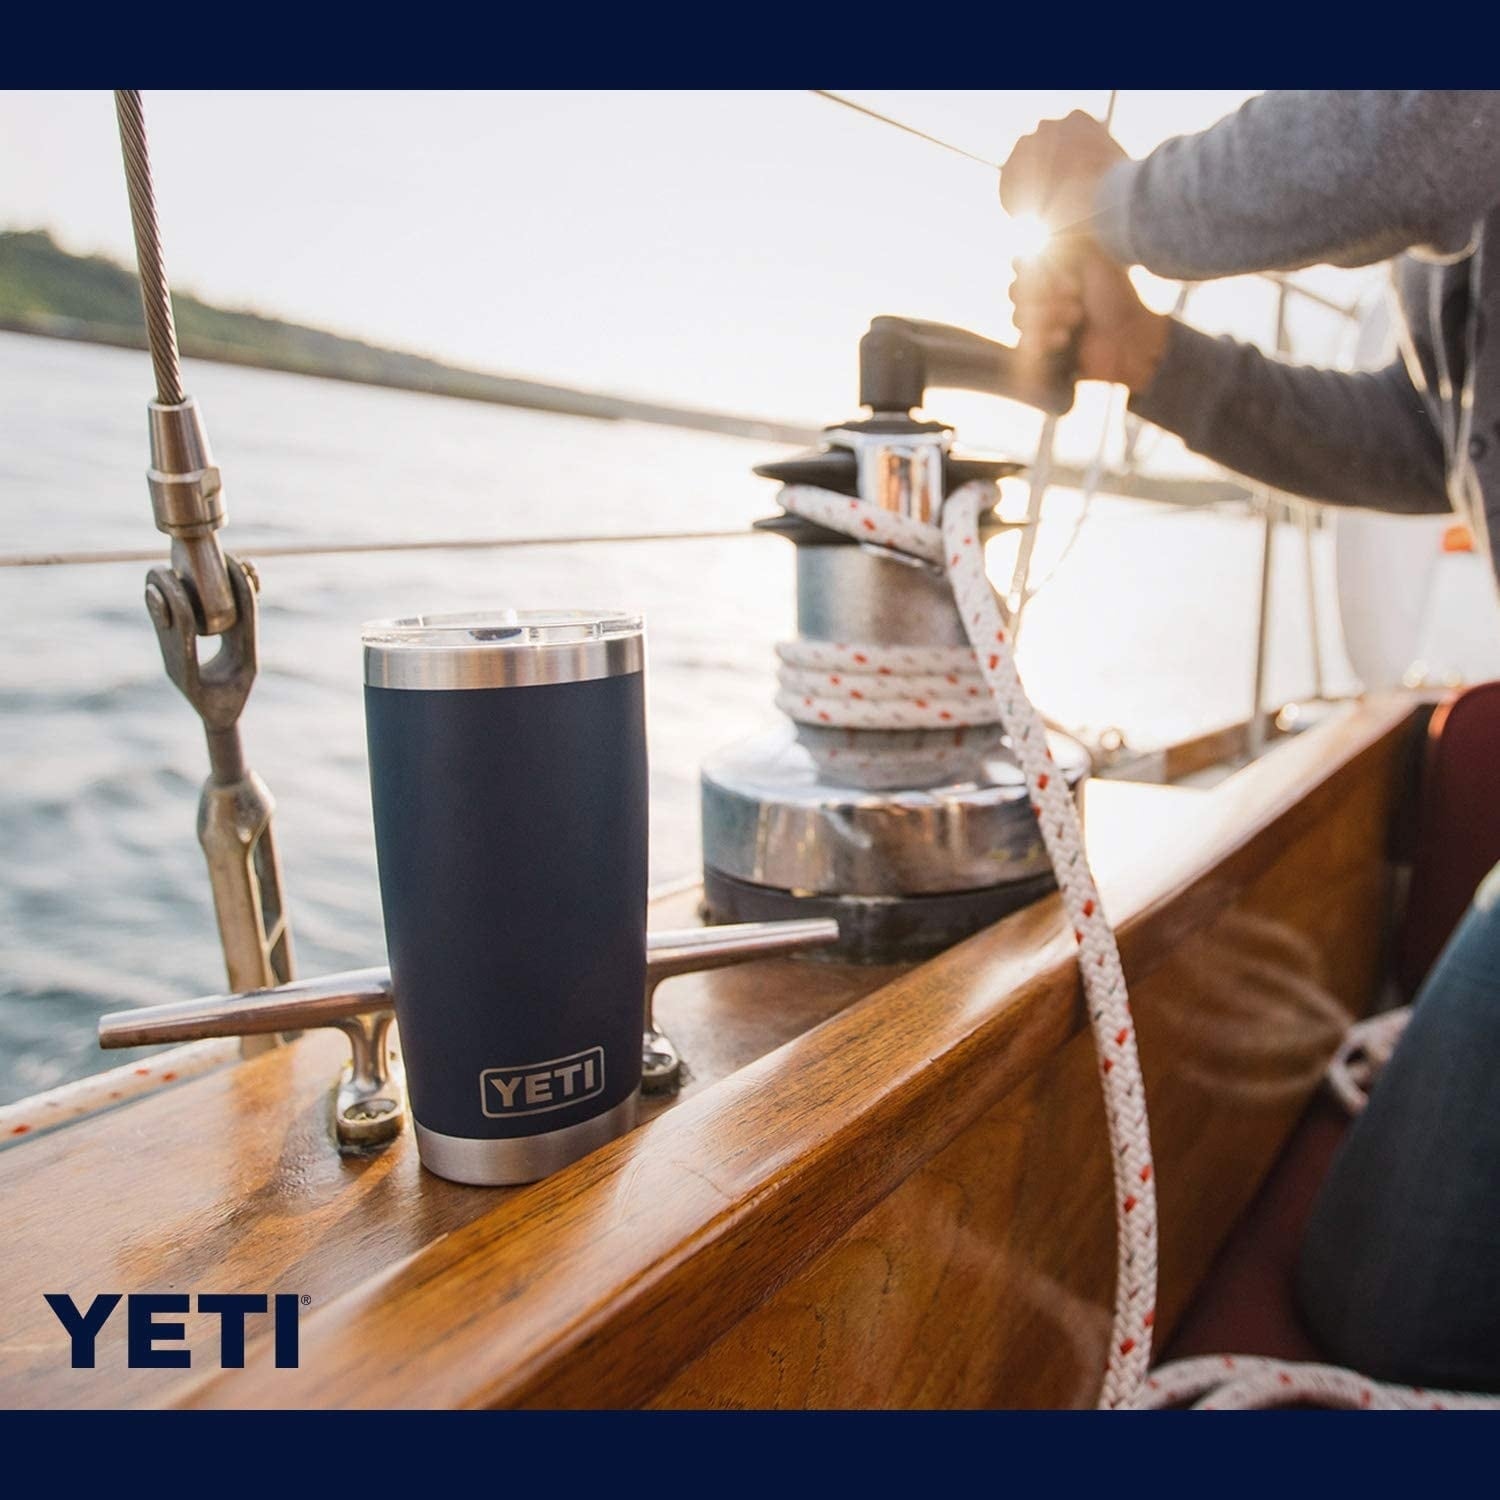 https://ak1.ostkcdn.com/images/products/is/images/direct/ecefe0d92dba1e4efe9803fece2b8f7f2b5aaddb/YETI-Rambler-20-oz-Stainless-Steel-Vacuum-Insulated-Tumbler-w-MagSlider-Lid.jpg